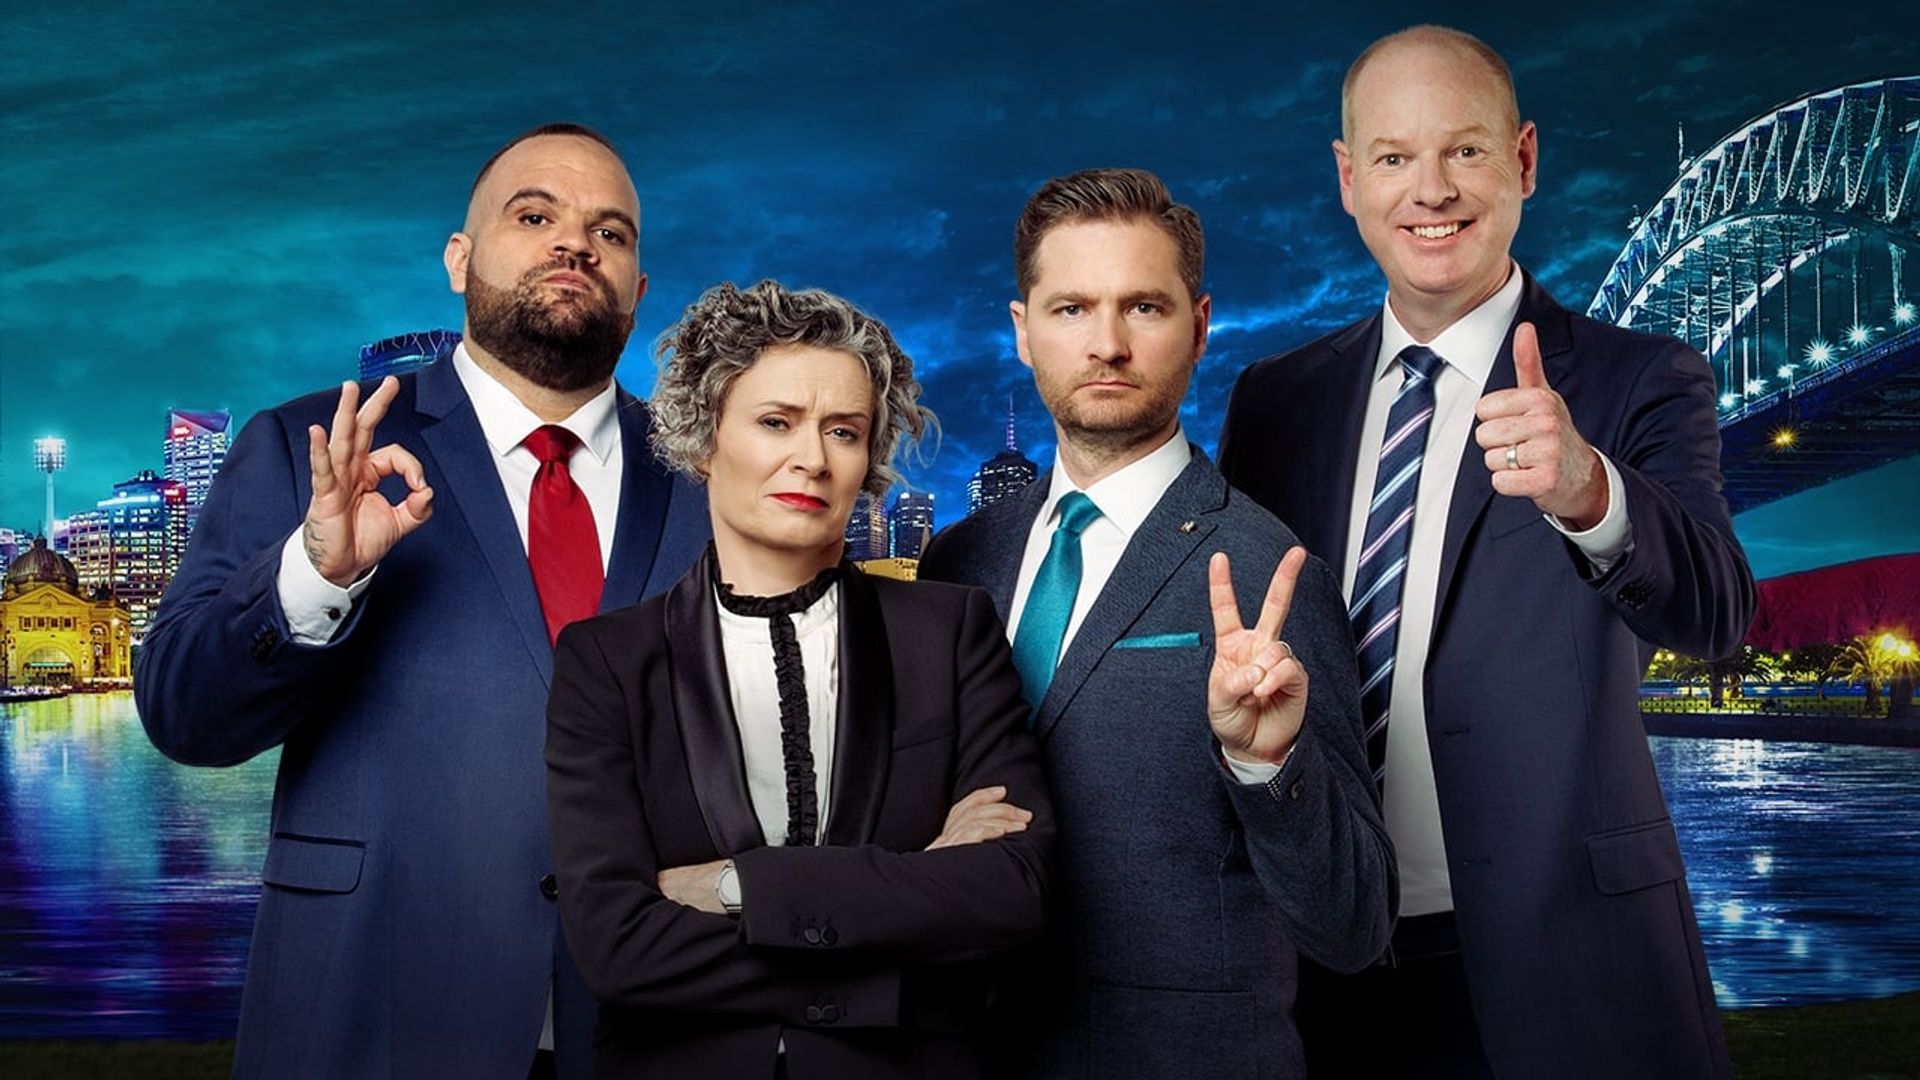 The Weekly with Charlie Pickering background